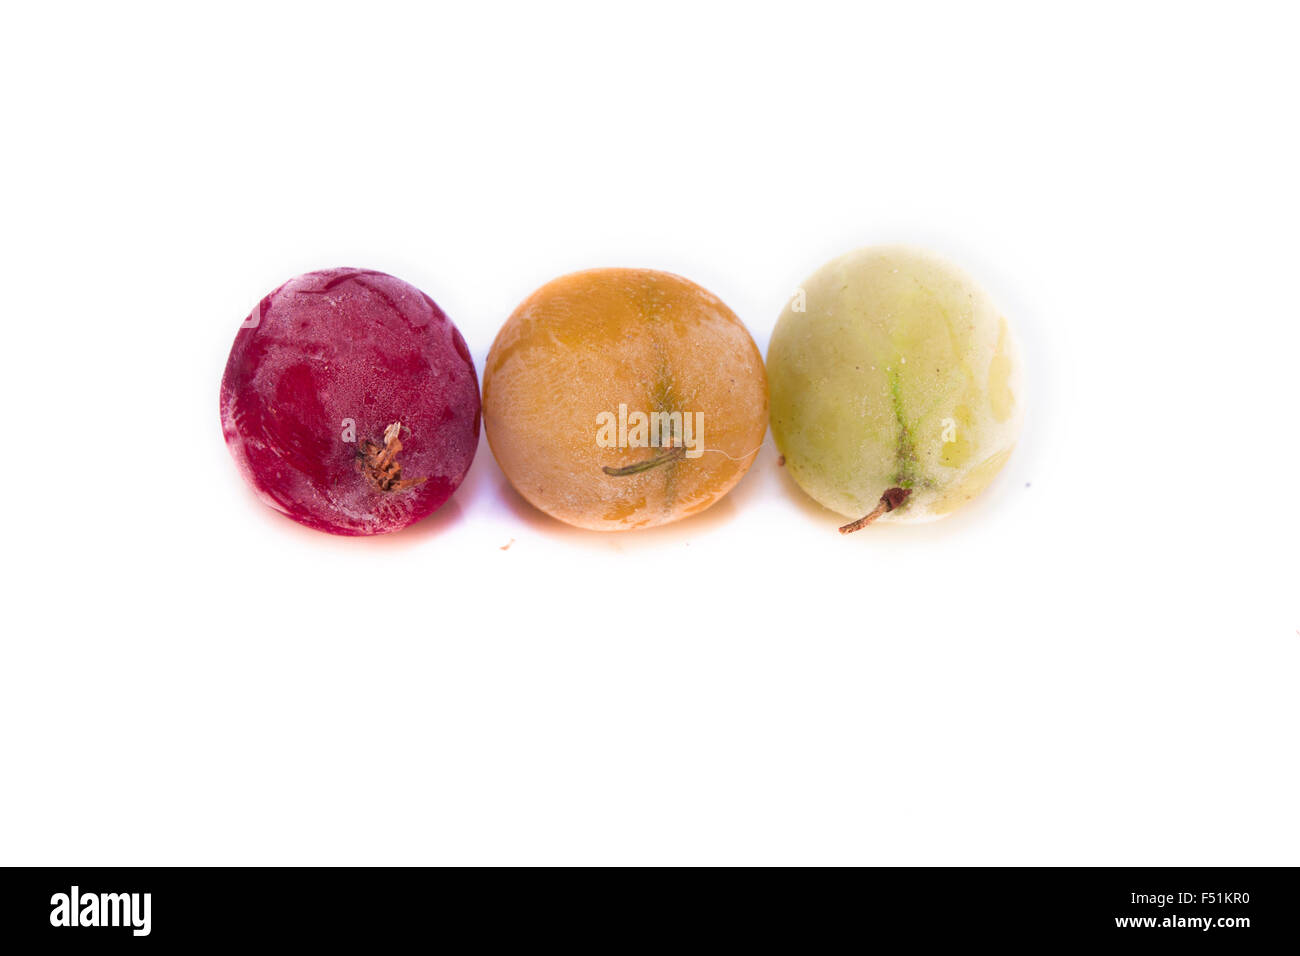 Frozen, red, green and yellow gooseberries, ribes uva-crispa, isolated on white background Stock Photo